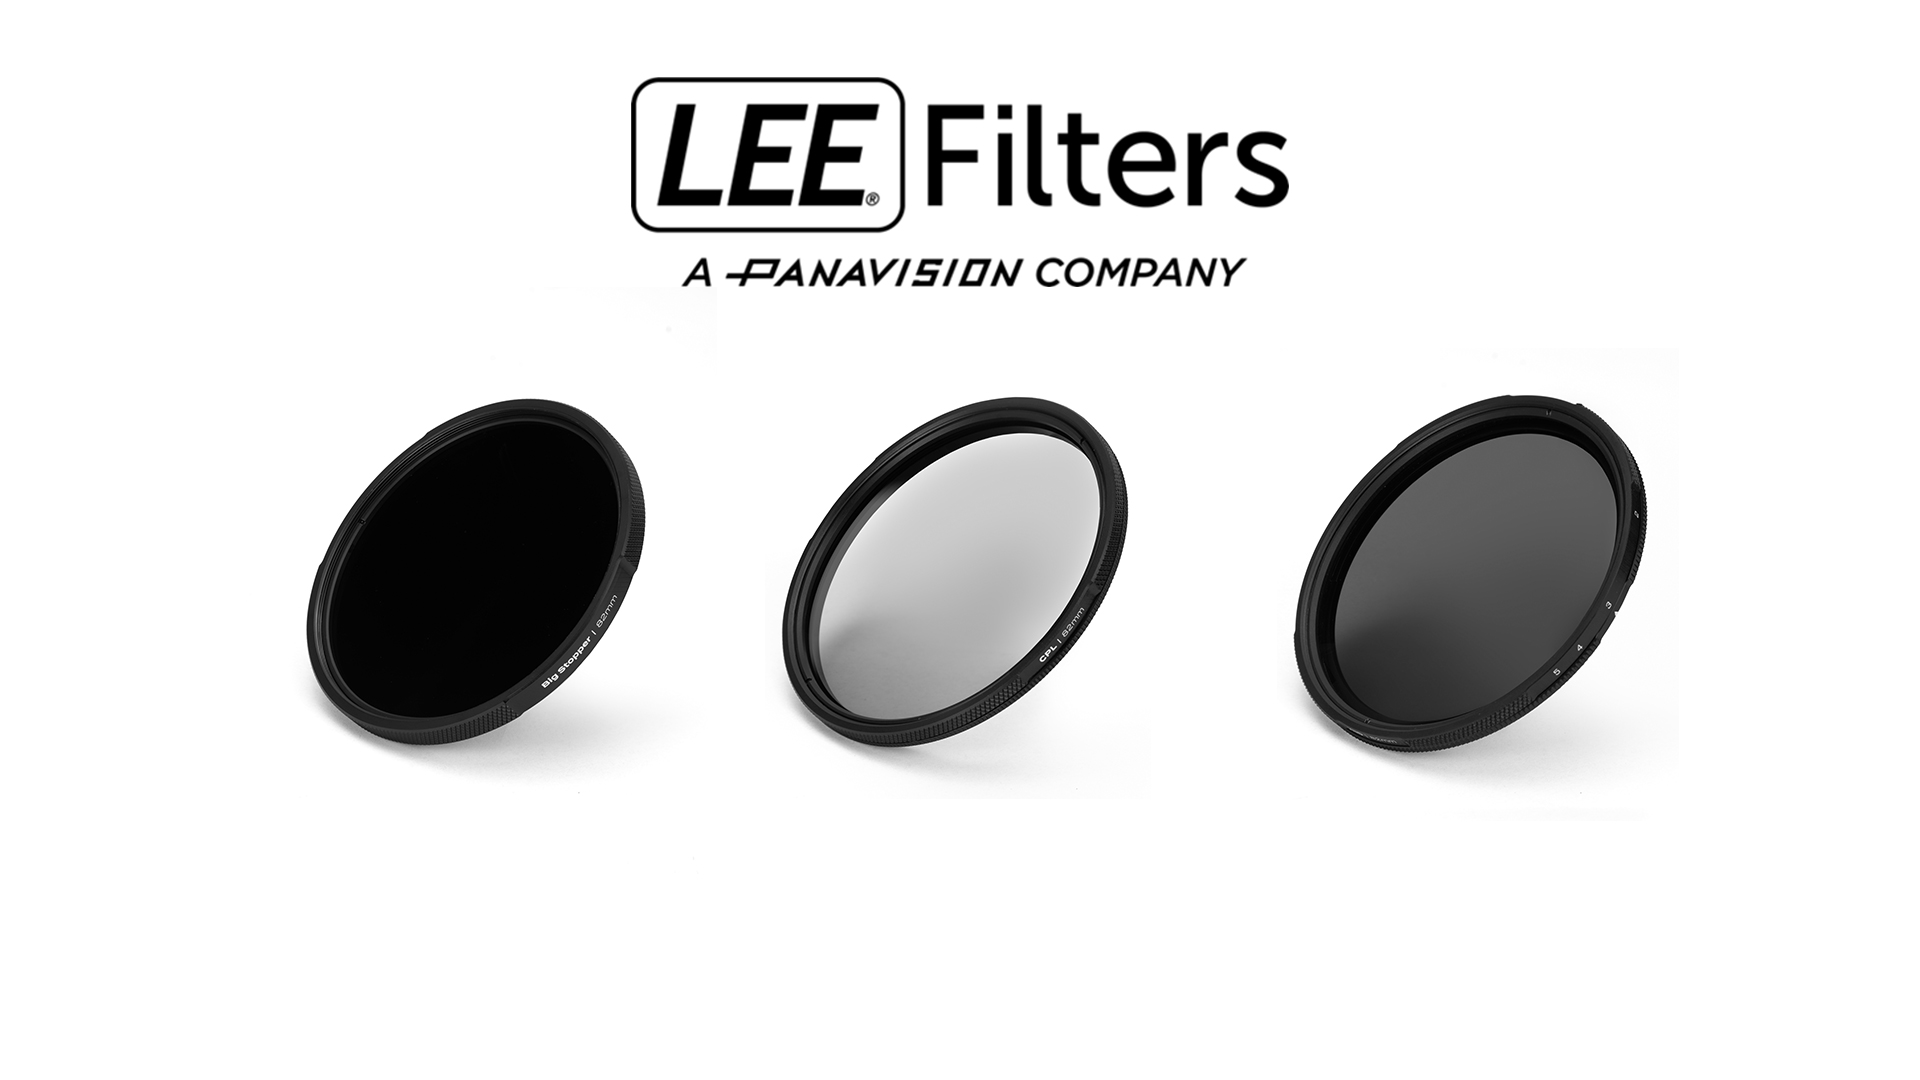 LEE Filters Elements high-performance and quick-to-deploy circular filters  - Newsshooter